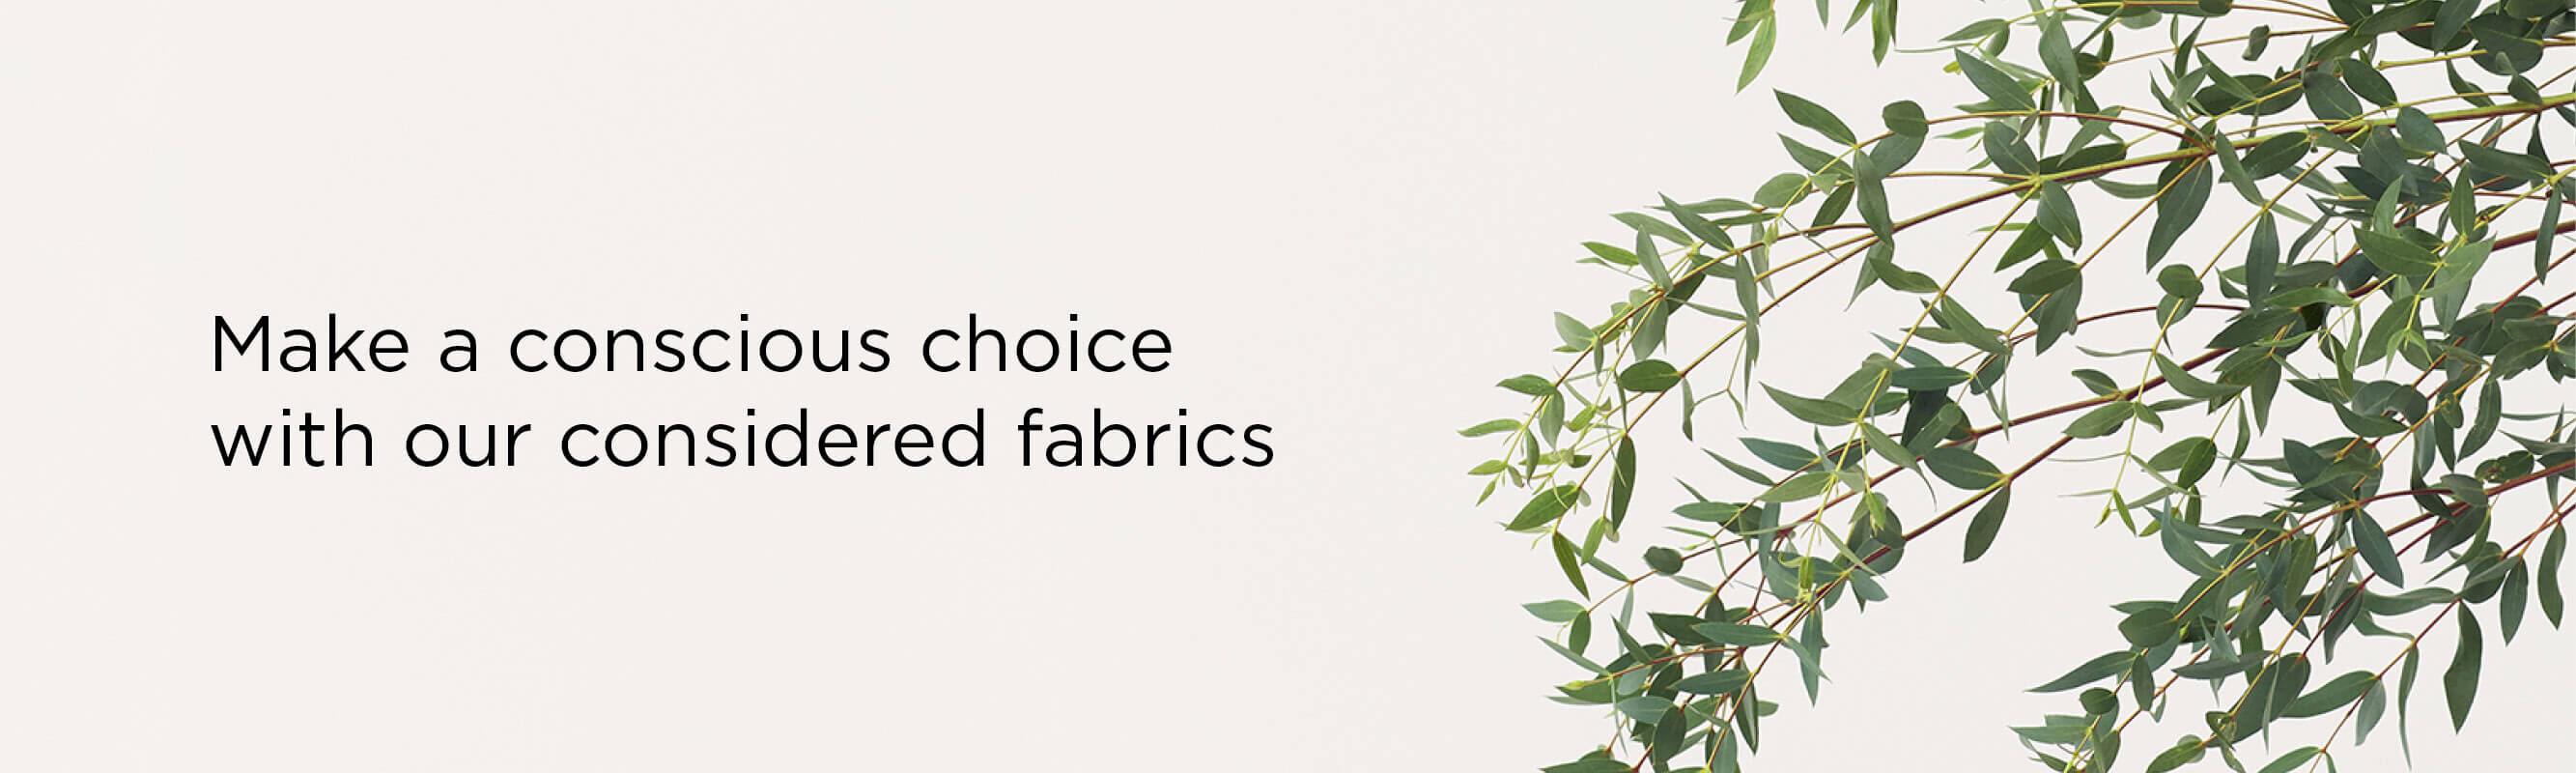 Make a conscious choice with our considered fabrics